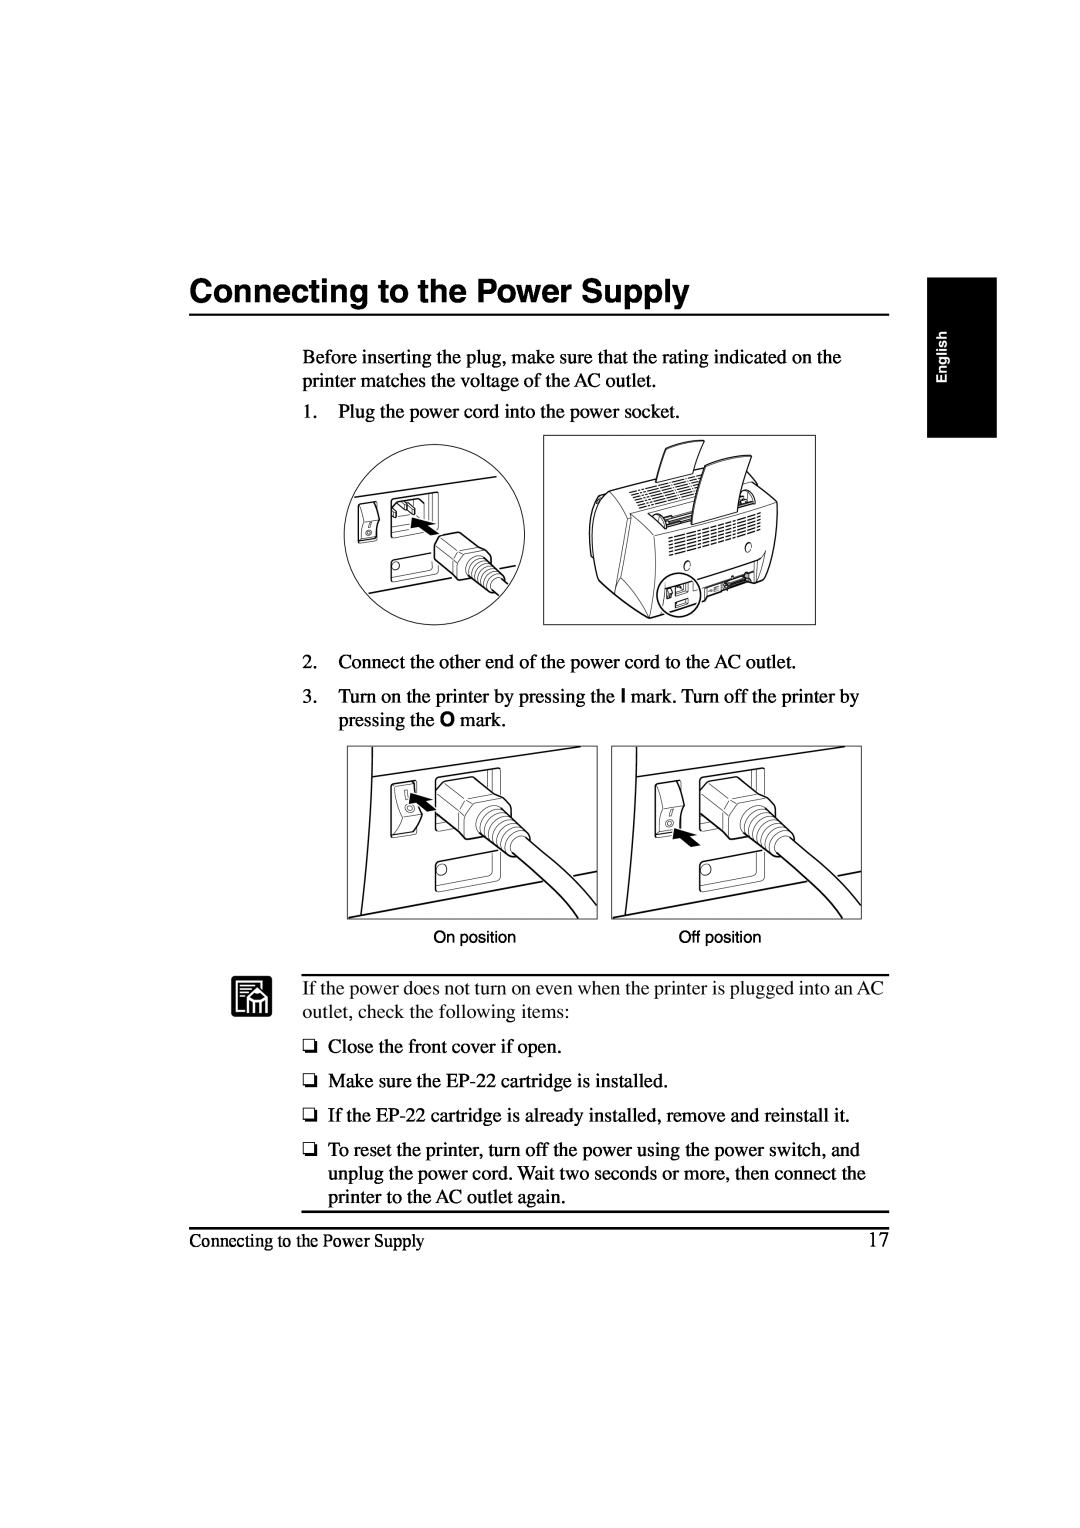 Canon LBP-810 manual Connecting to the Power Supply 